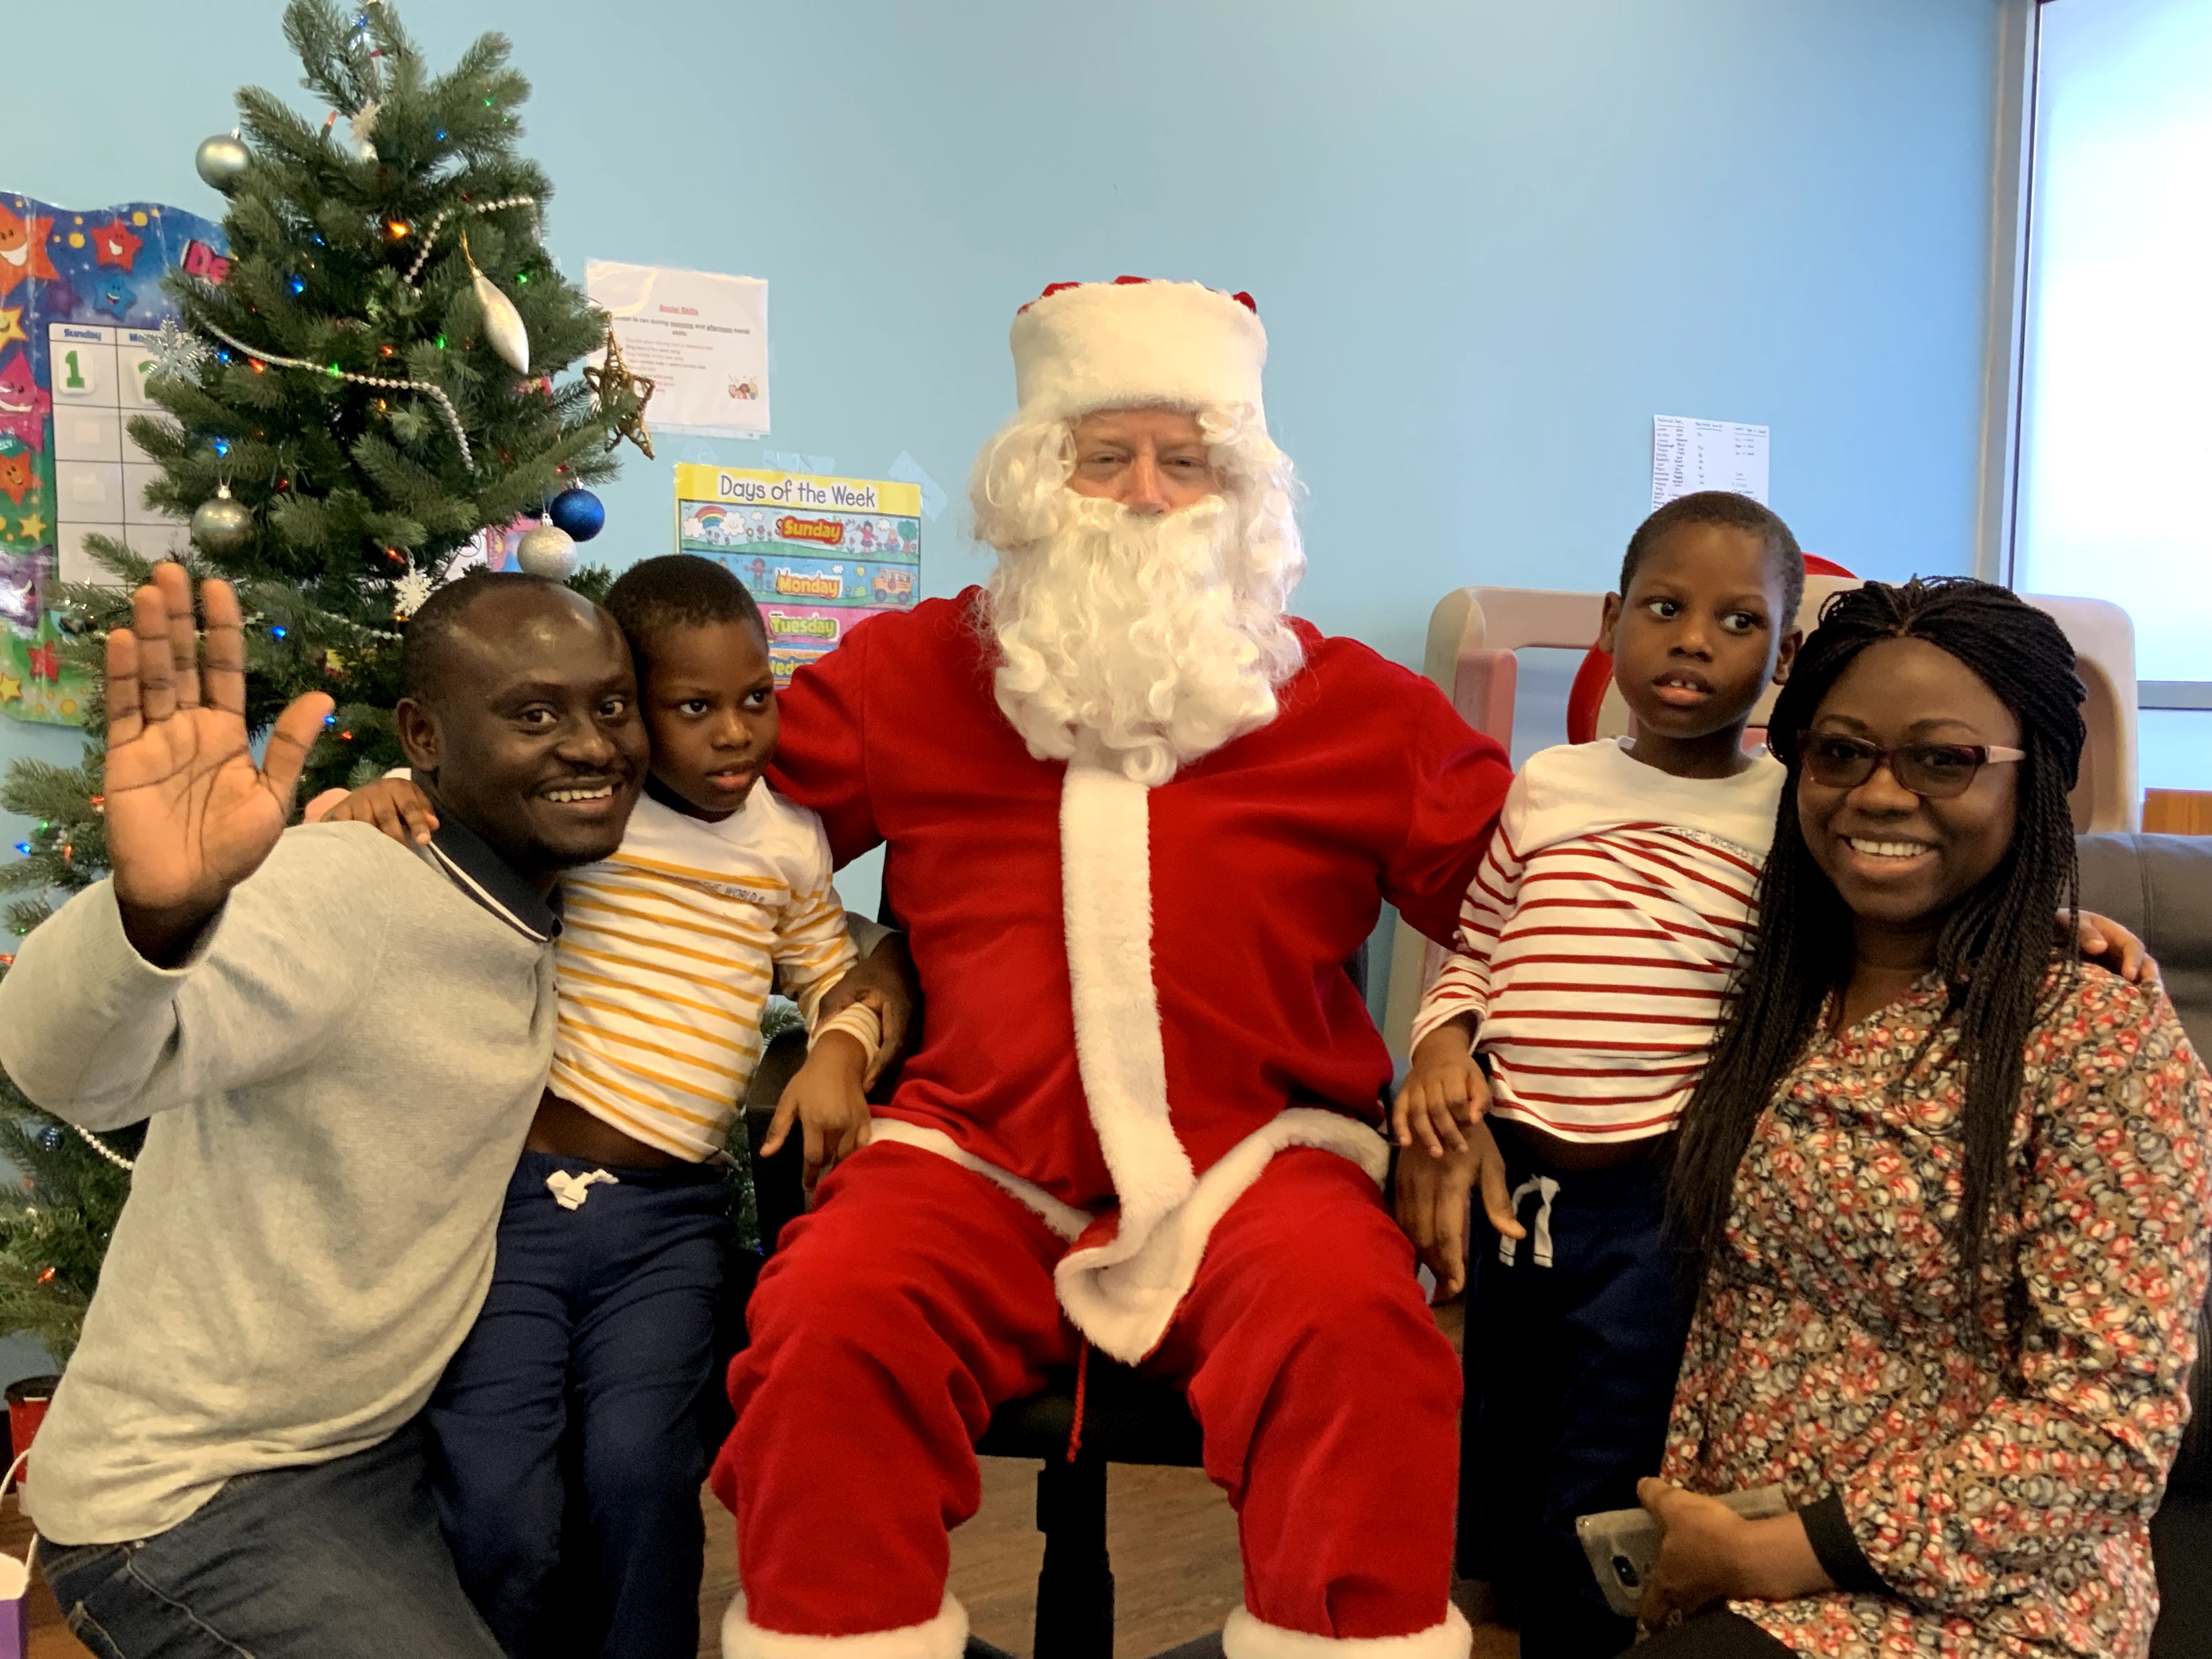 Santa poses with a family of two children